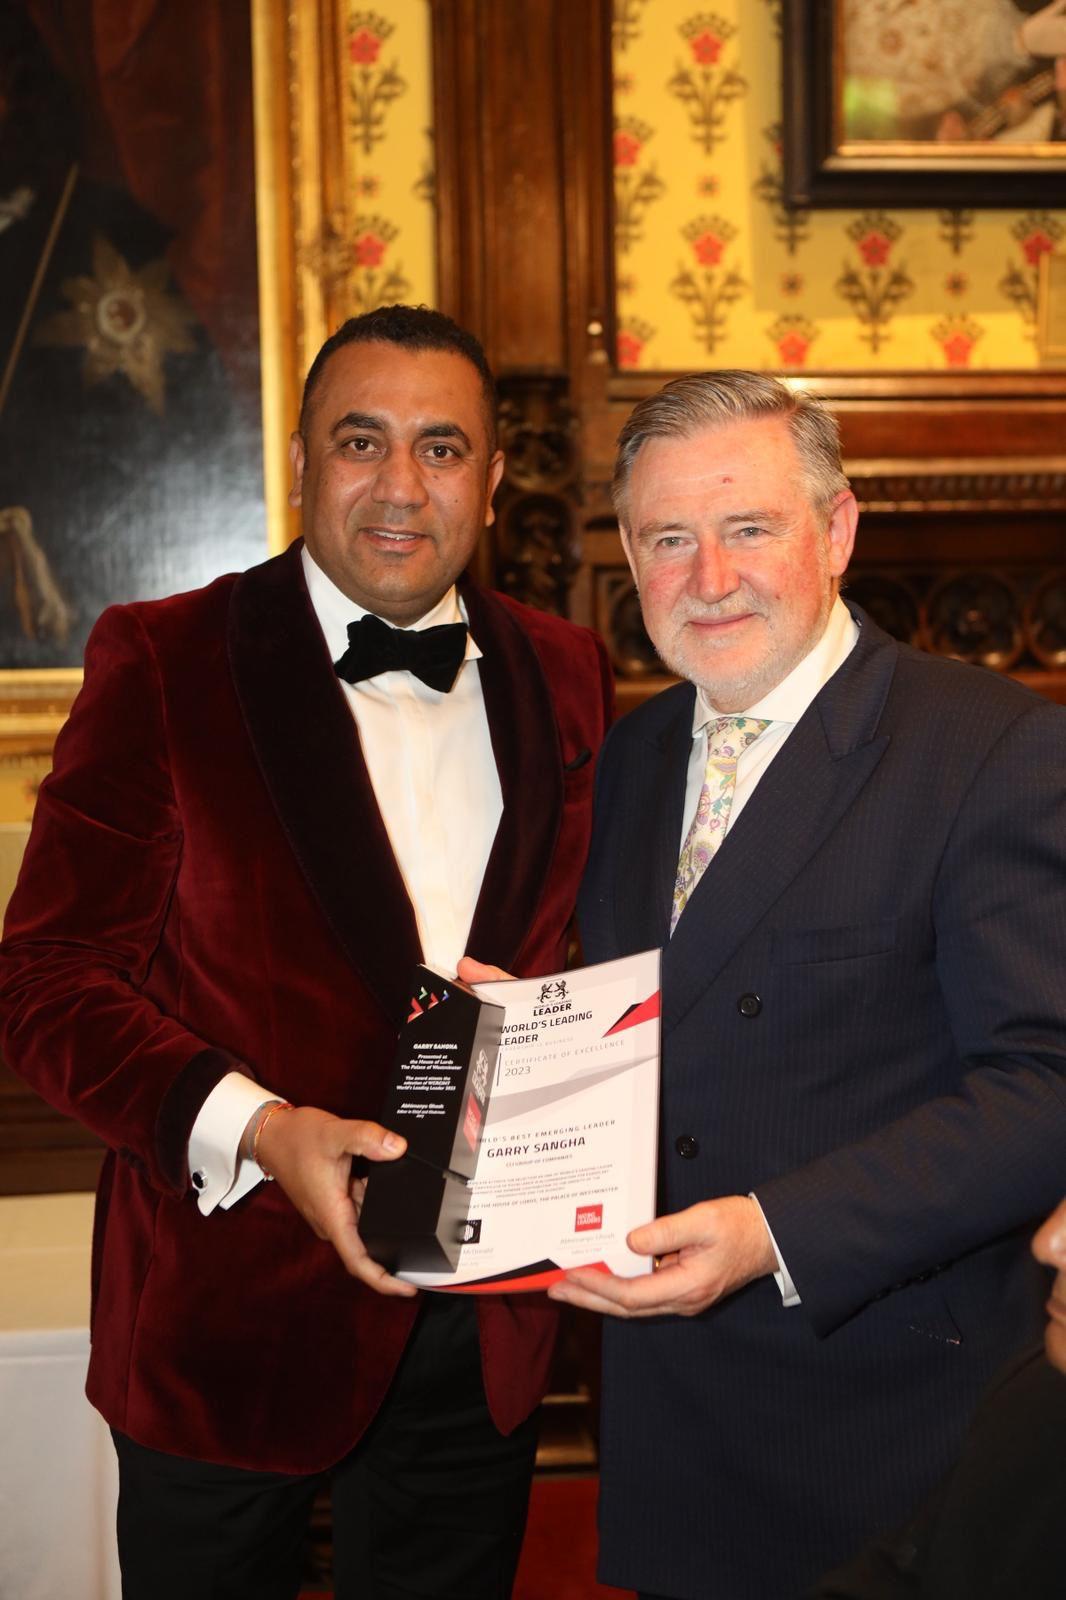 Punjabi Business Man Garry Sangha awarded at the House of Lords in the construction and development industry by WCRC